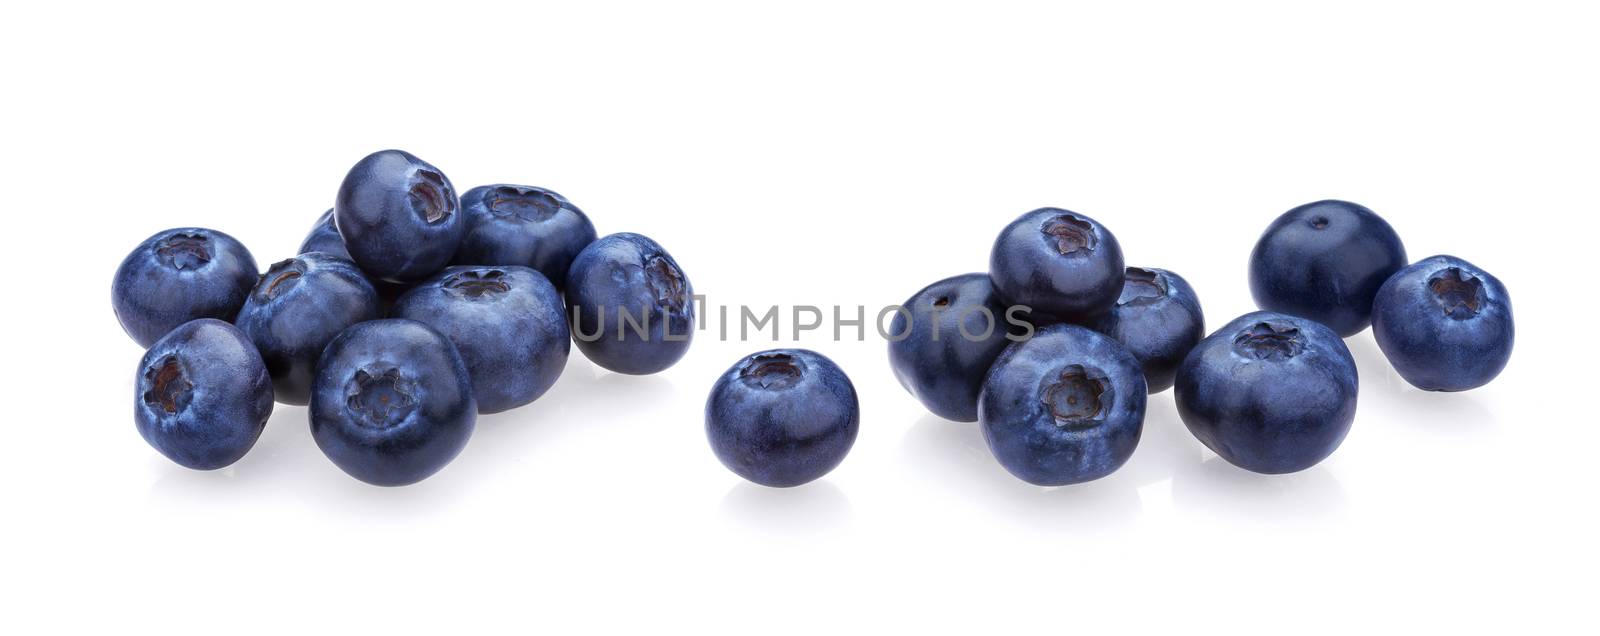 Blueberry isolated on white background. A pile of fresh blueberries, close-up, collection by xamtiw